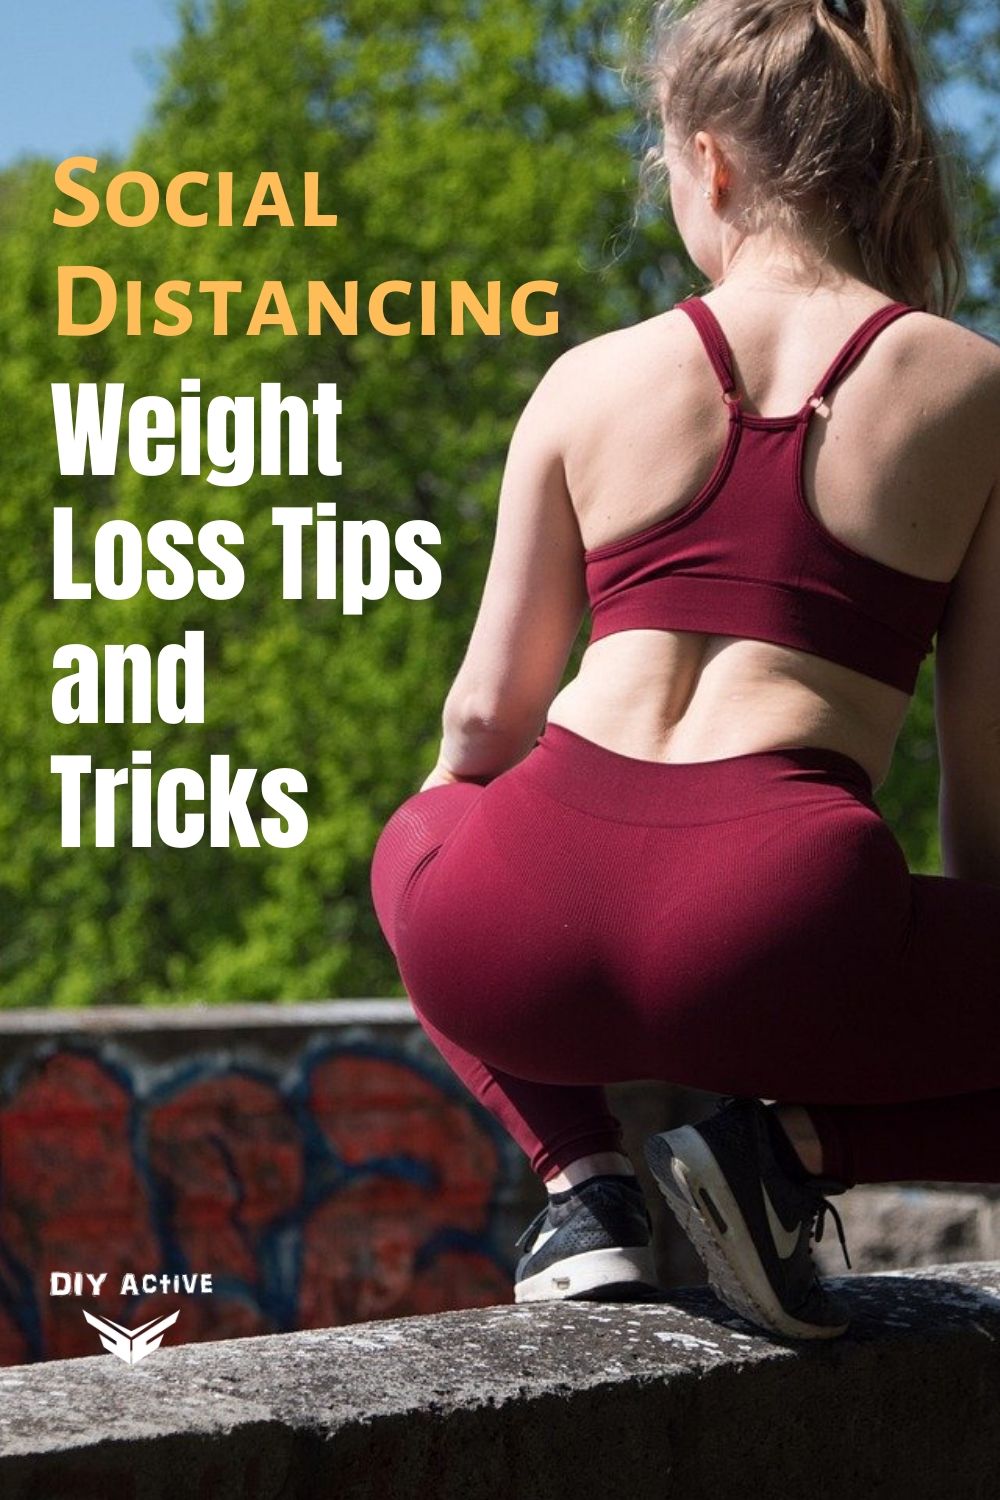 Social Distancing Weight Loss Tips and Tricks